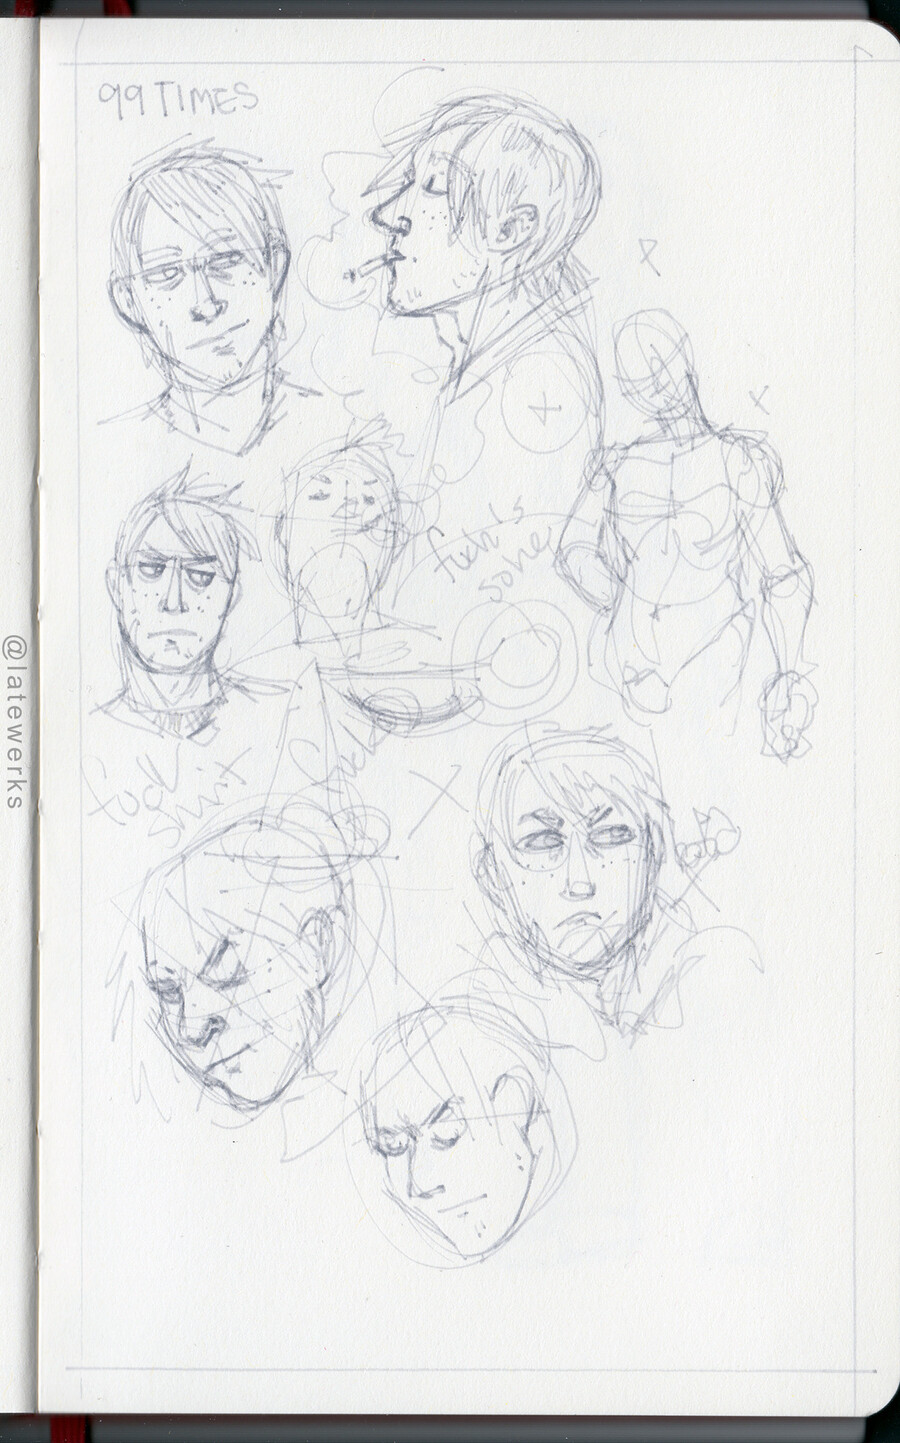 Rough character sketches, Roush